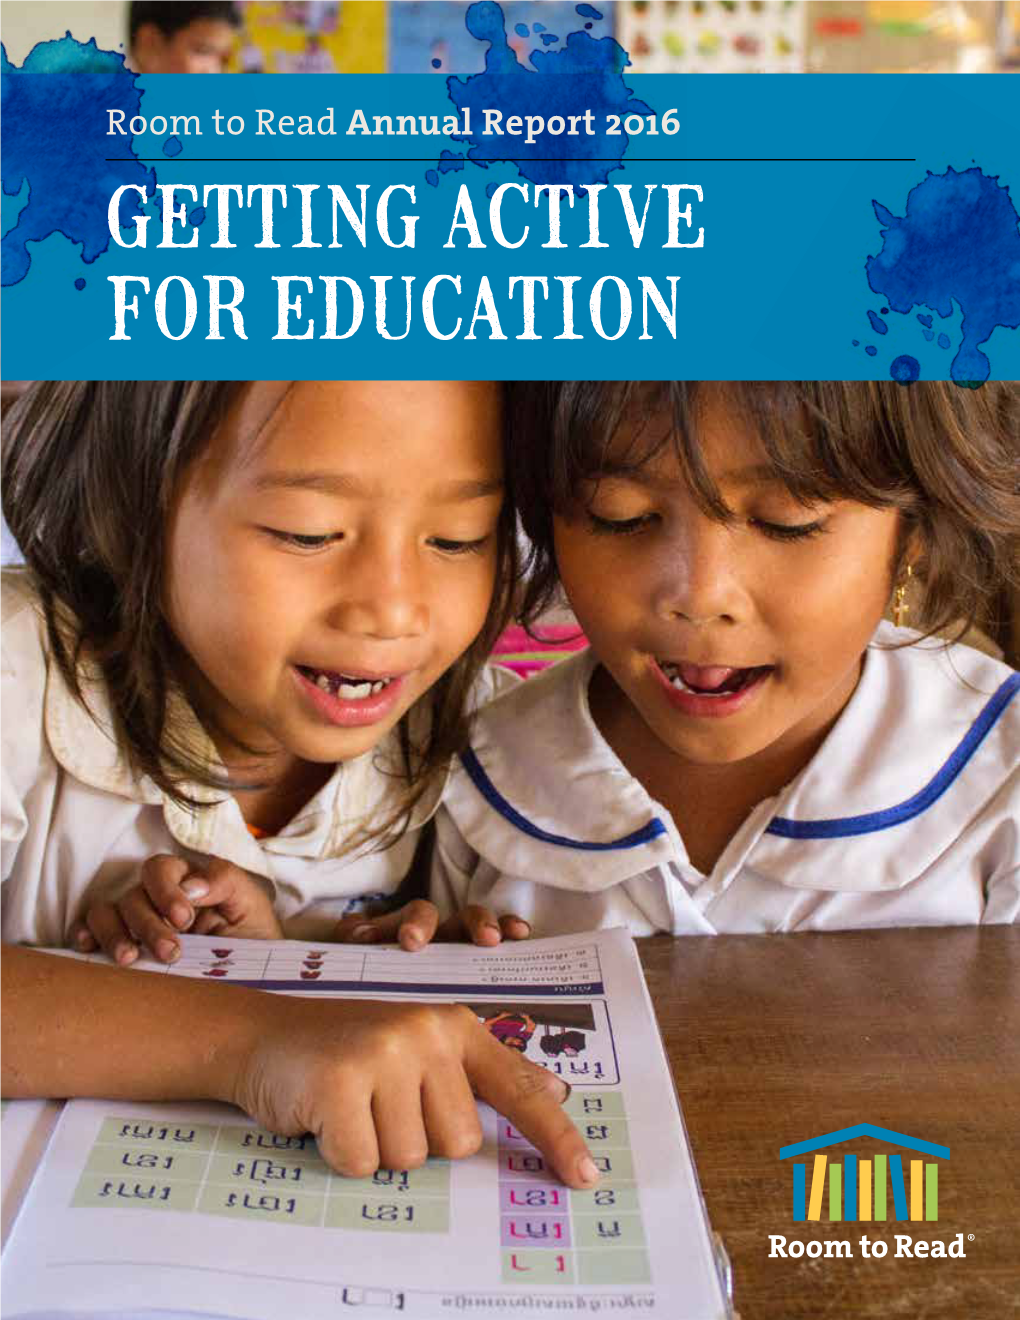 Room to Read Annual Report 2016 GETTING ACTIVE for EDUCATION 1 | INTRODUCTION